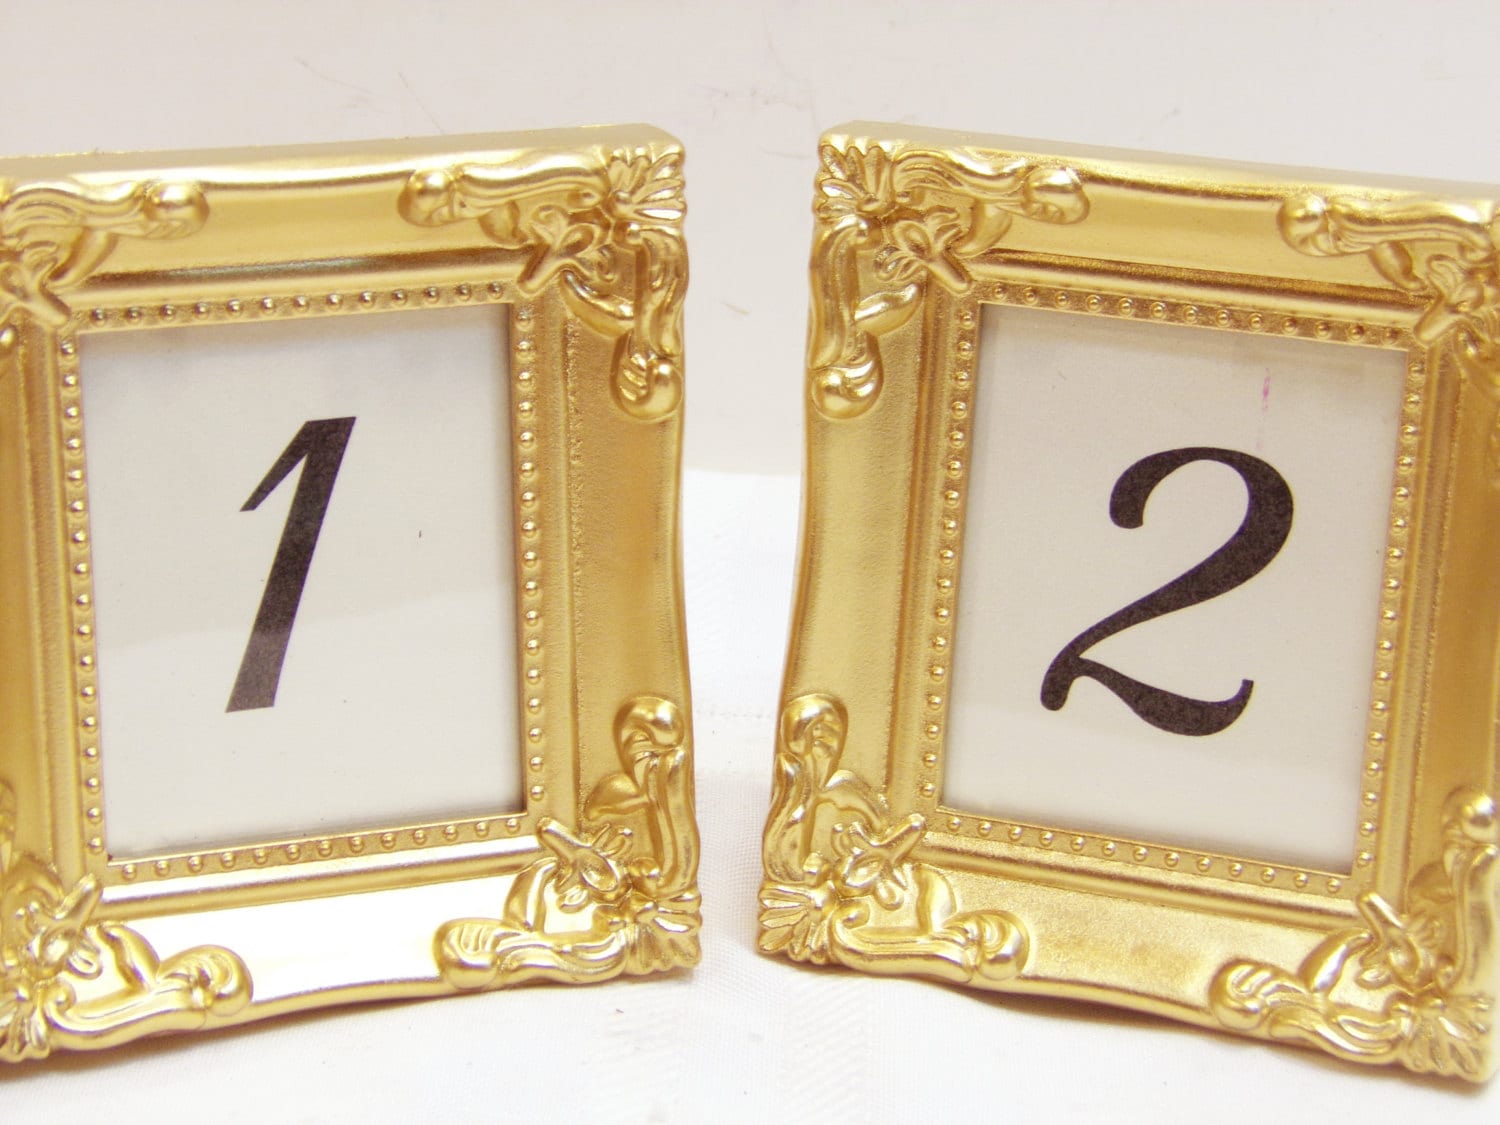 2-ornate-wedding-frames-table-numbers-victorian-shabby-vintage